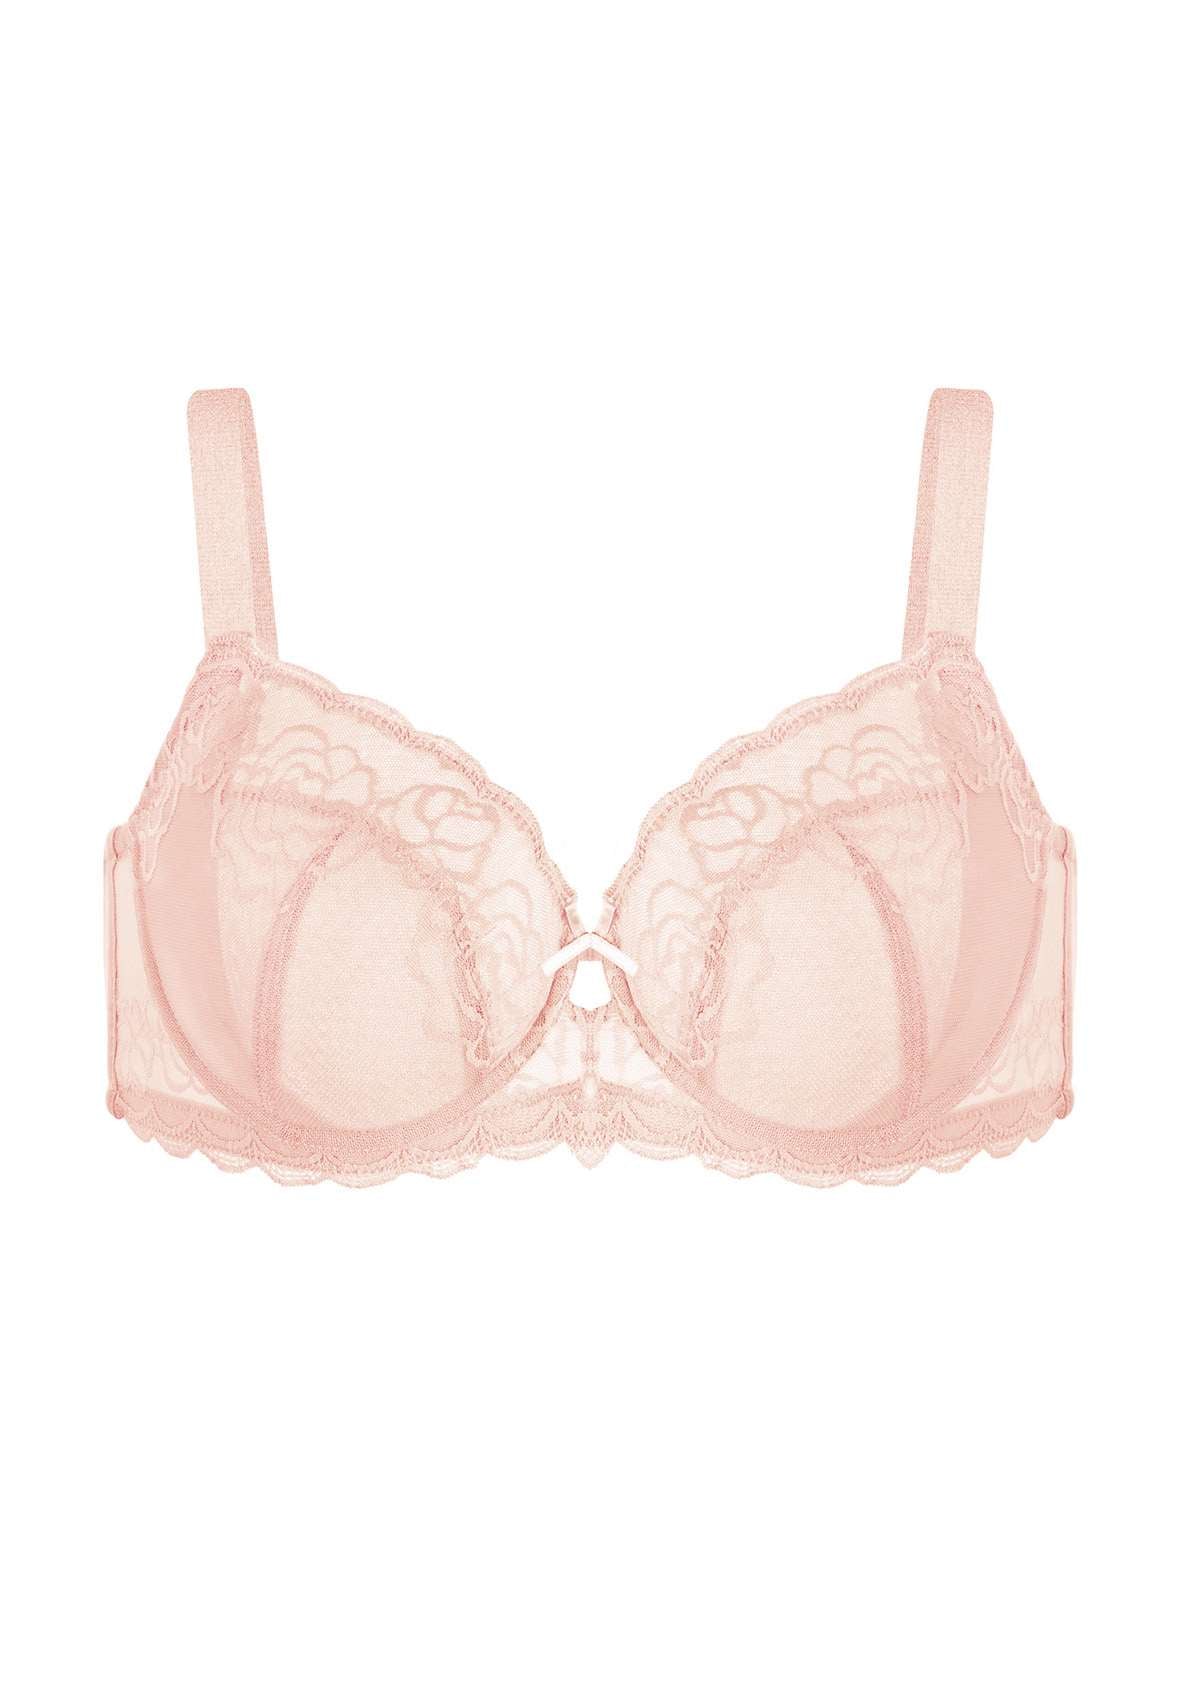 HSIA Rosa Bonica Sheer Lace Mesh Unlined Thin Comfy Woman Bra - Pink / 42 / D